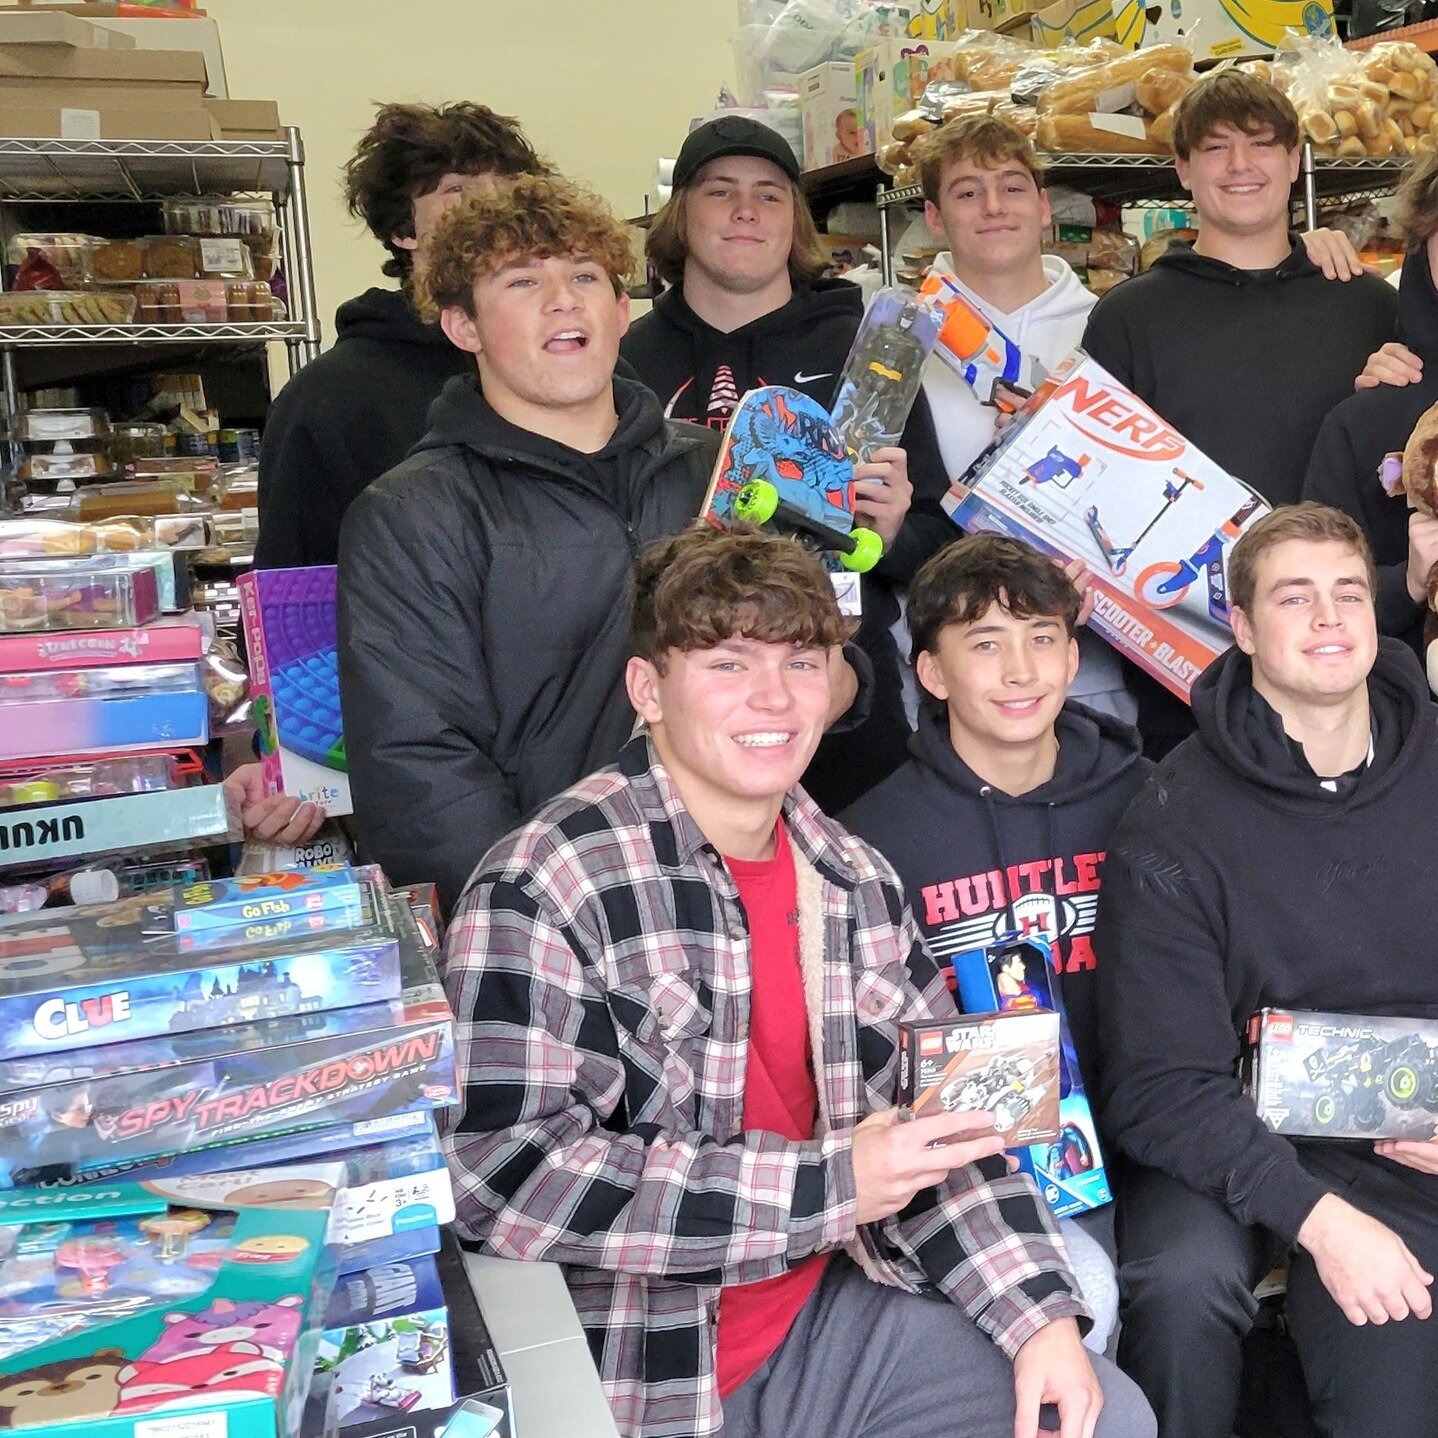 The Huntley High School Football Program under the leadership of Coach Naymola, conducted their 12th Annual Holiday Promise Program, presenting more than 300 toys and gifts to Grafton Food Pantry. The program, started by Chase Burkart, a former playe